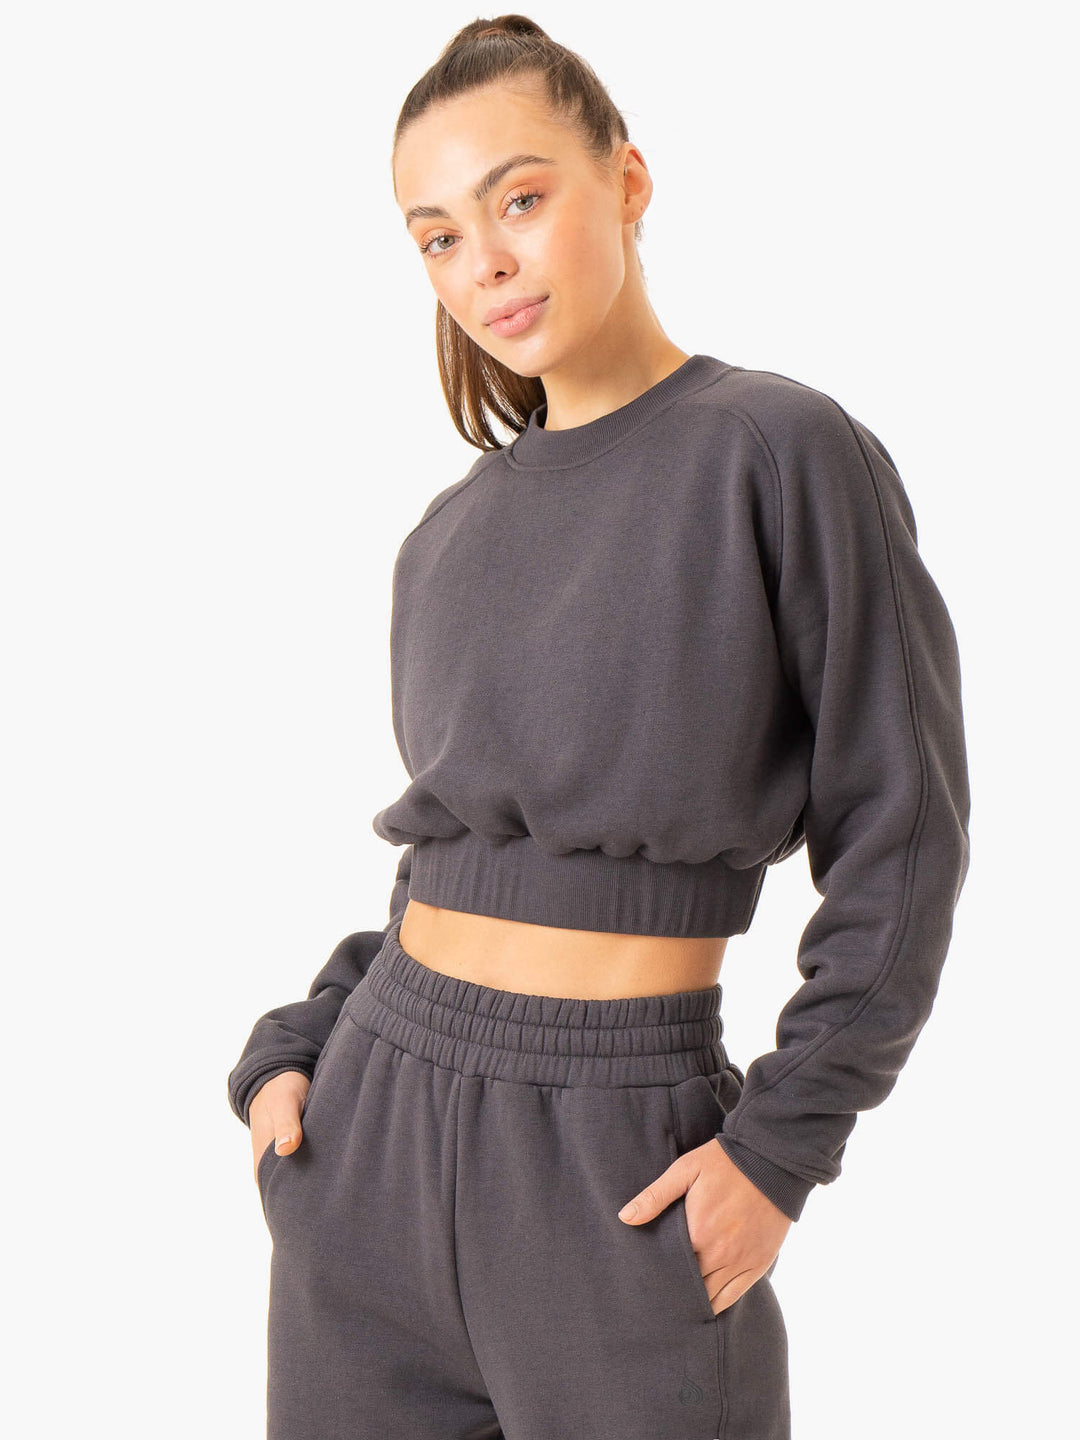 Sideline Sweater - Charcoal Clothing Ryderwear 